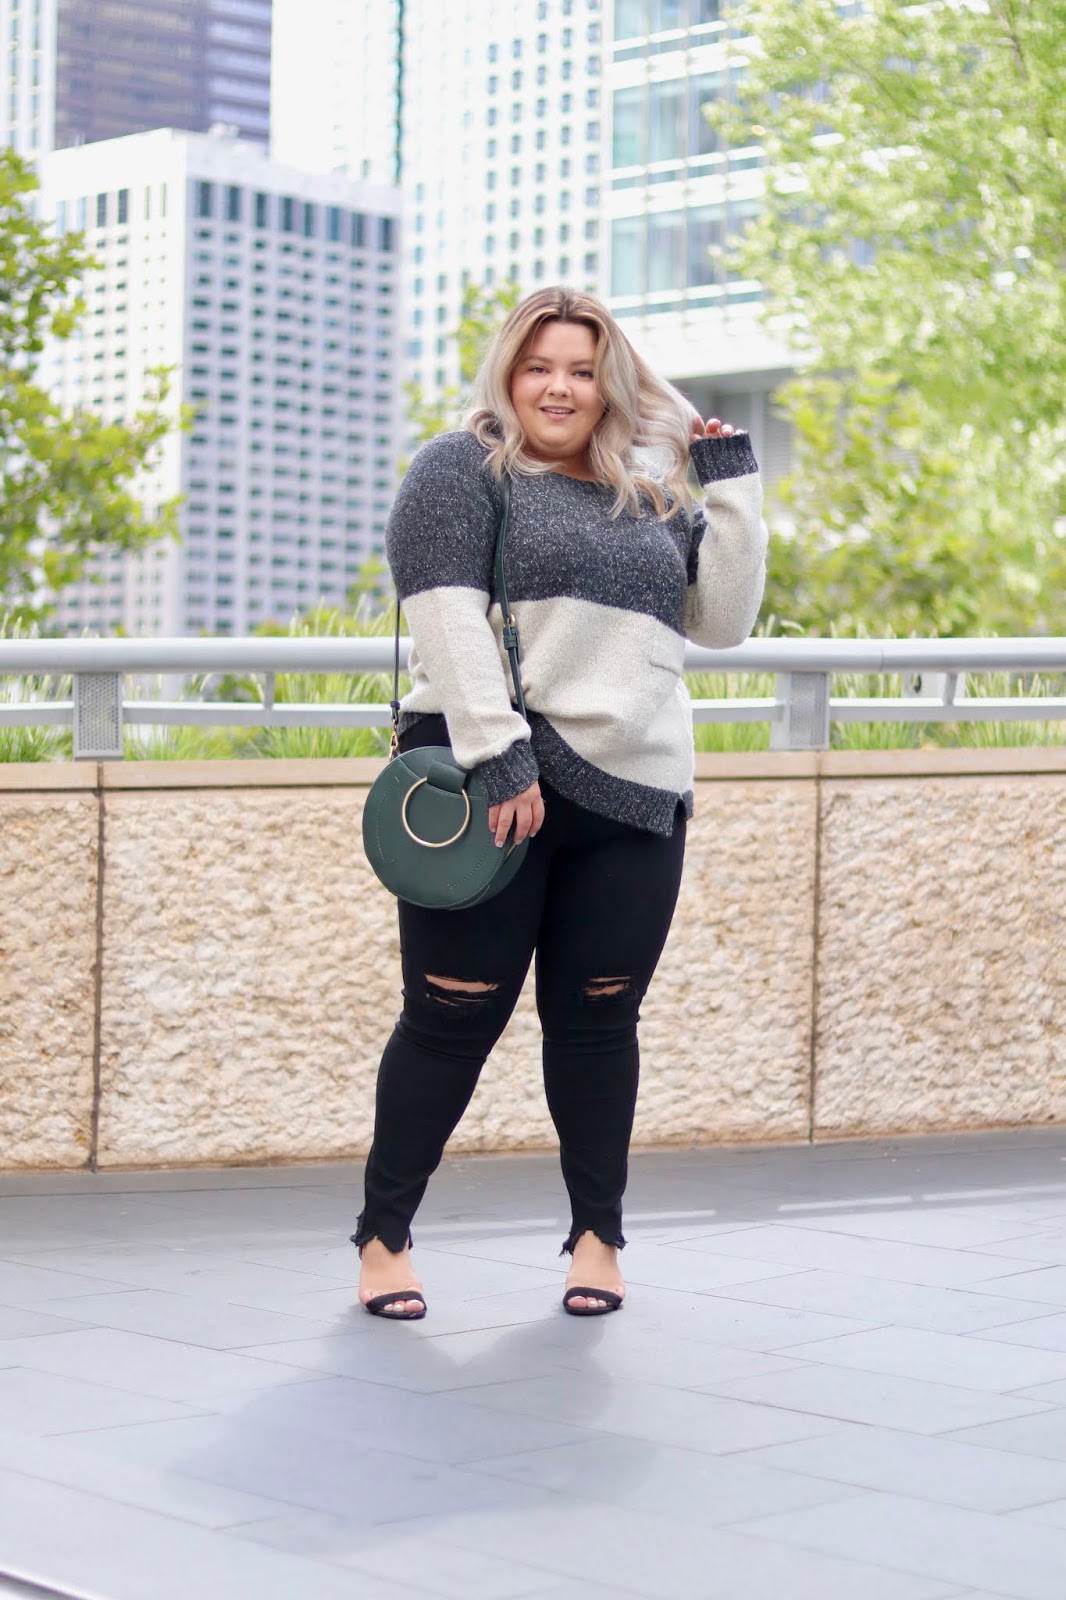 Chicago Plus Size Petite Fashion Blogger, influencer, YouTuber, and model Natalie Craig, of Natalie in the City, reviews Chic Soul's black skinny jeans and oversized fall sweater.